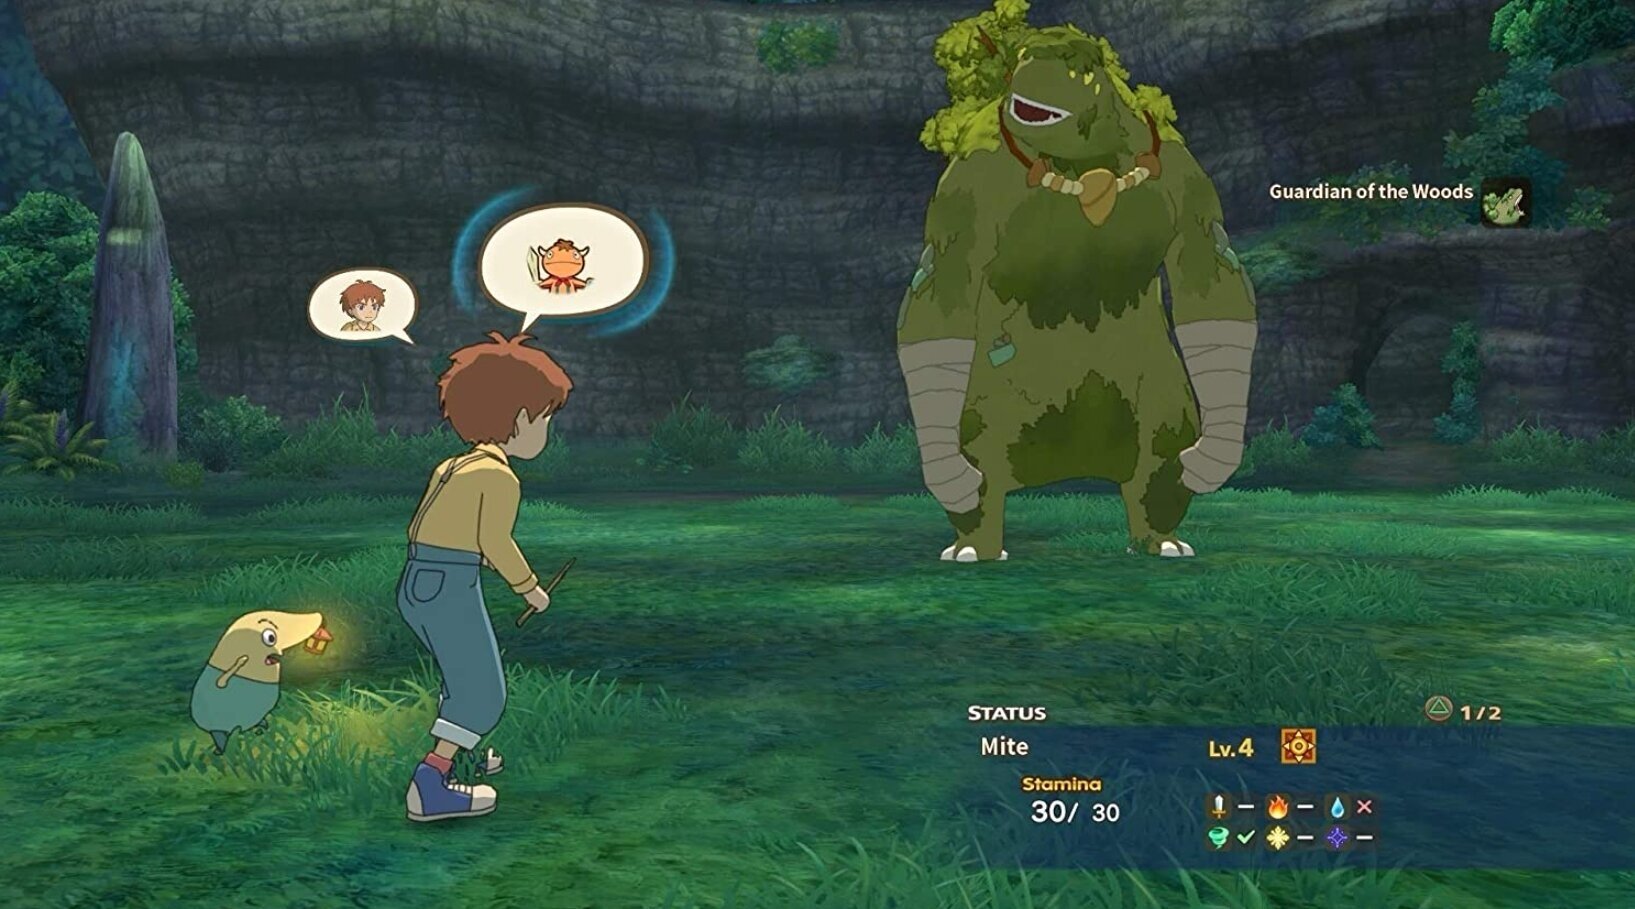 Игра Ni no Kuni: Wrath of the White Witch Remastered